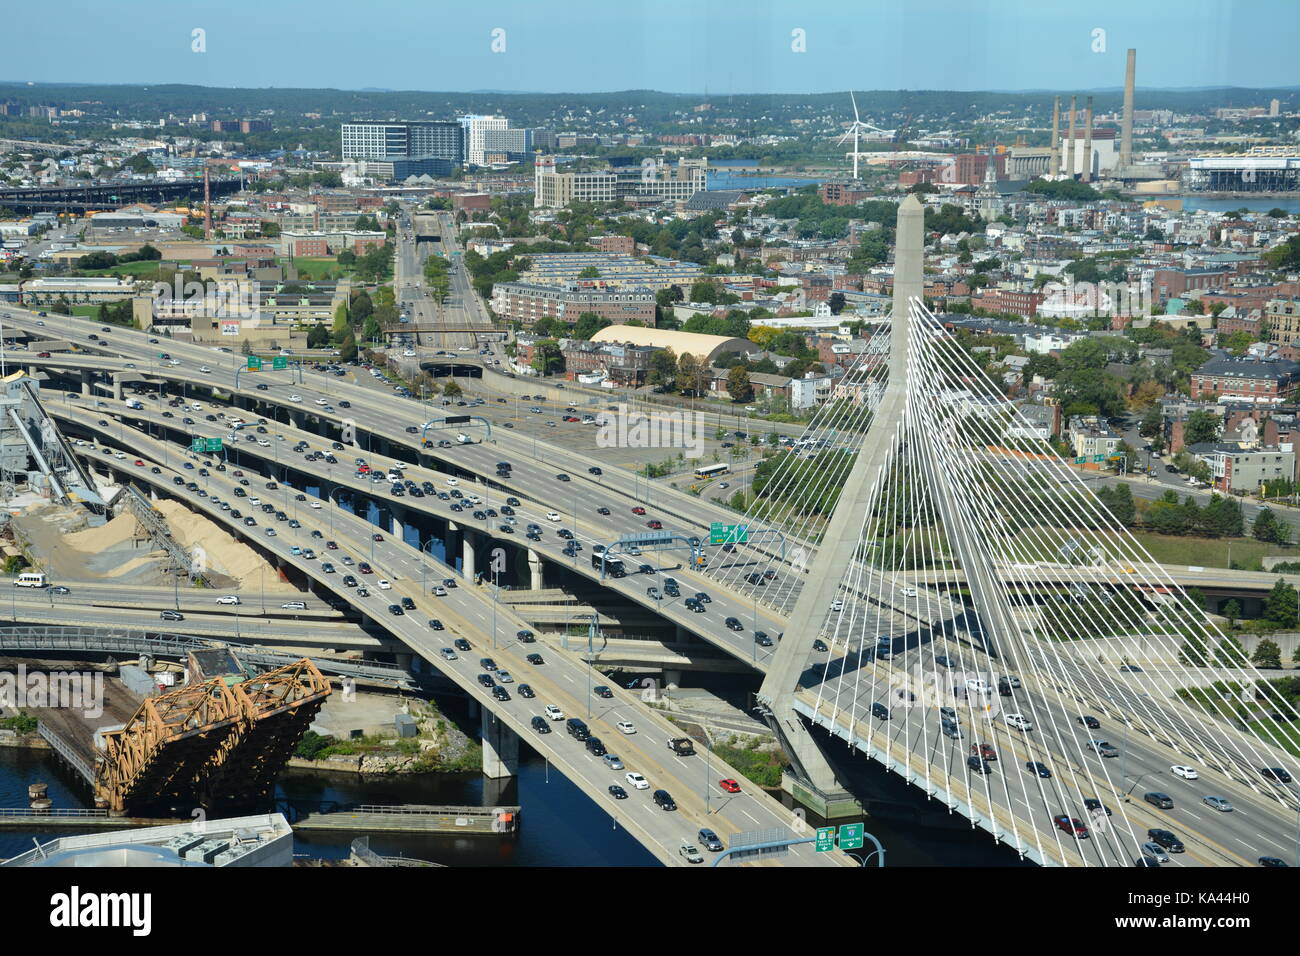 The Bunker Hill Memorial Leonard P. Zakim bridge in Boston, and points North seen from atop of a skyscraper in the West End on a sunny day. Stock Photo